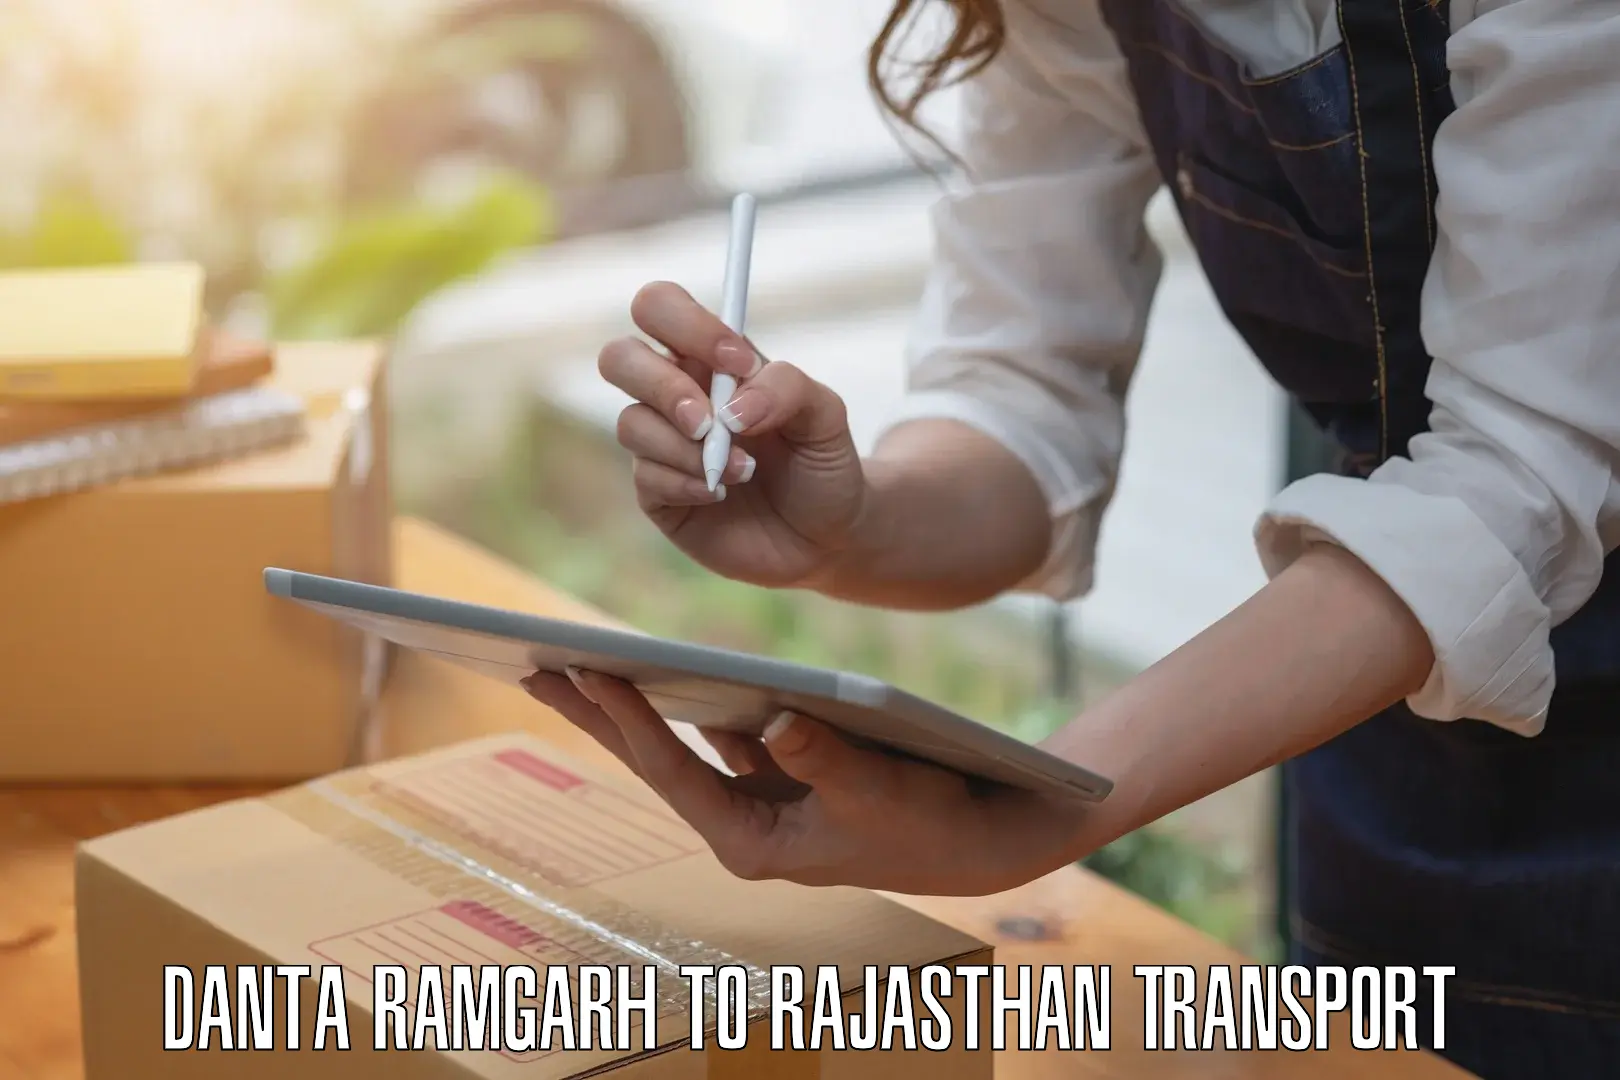 Package delivery services Danta Ramgarh to Tarnau